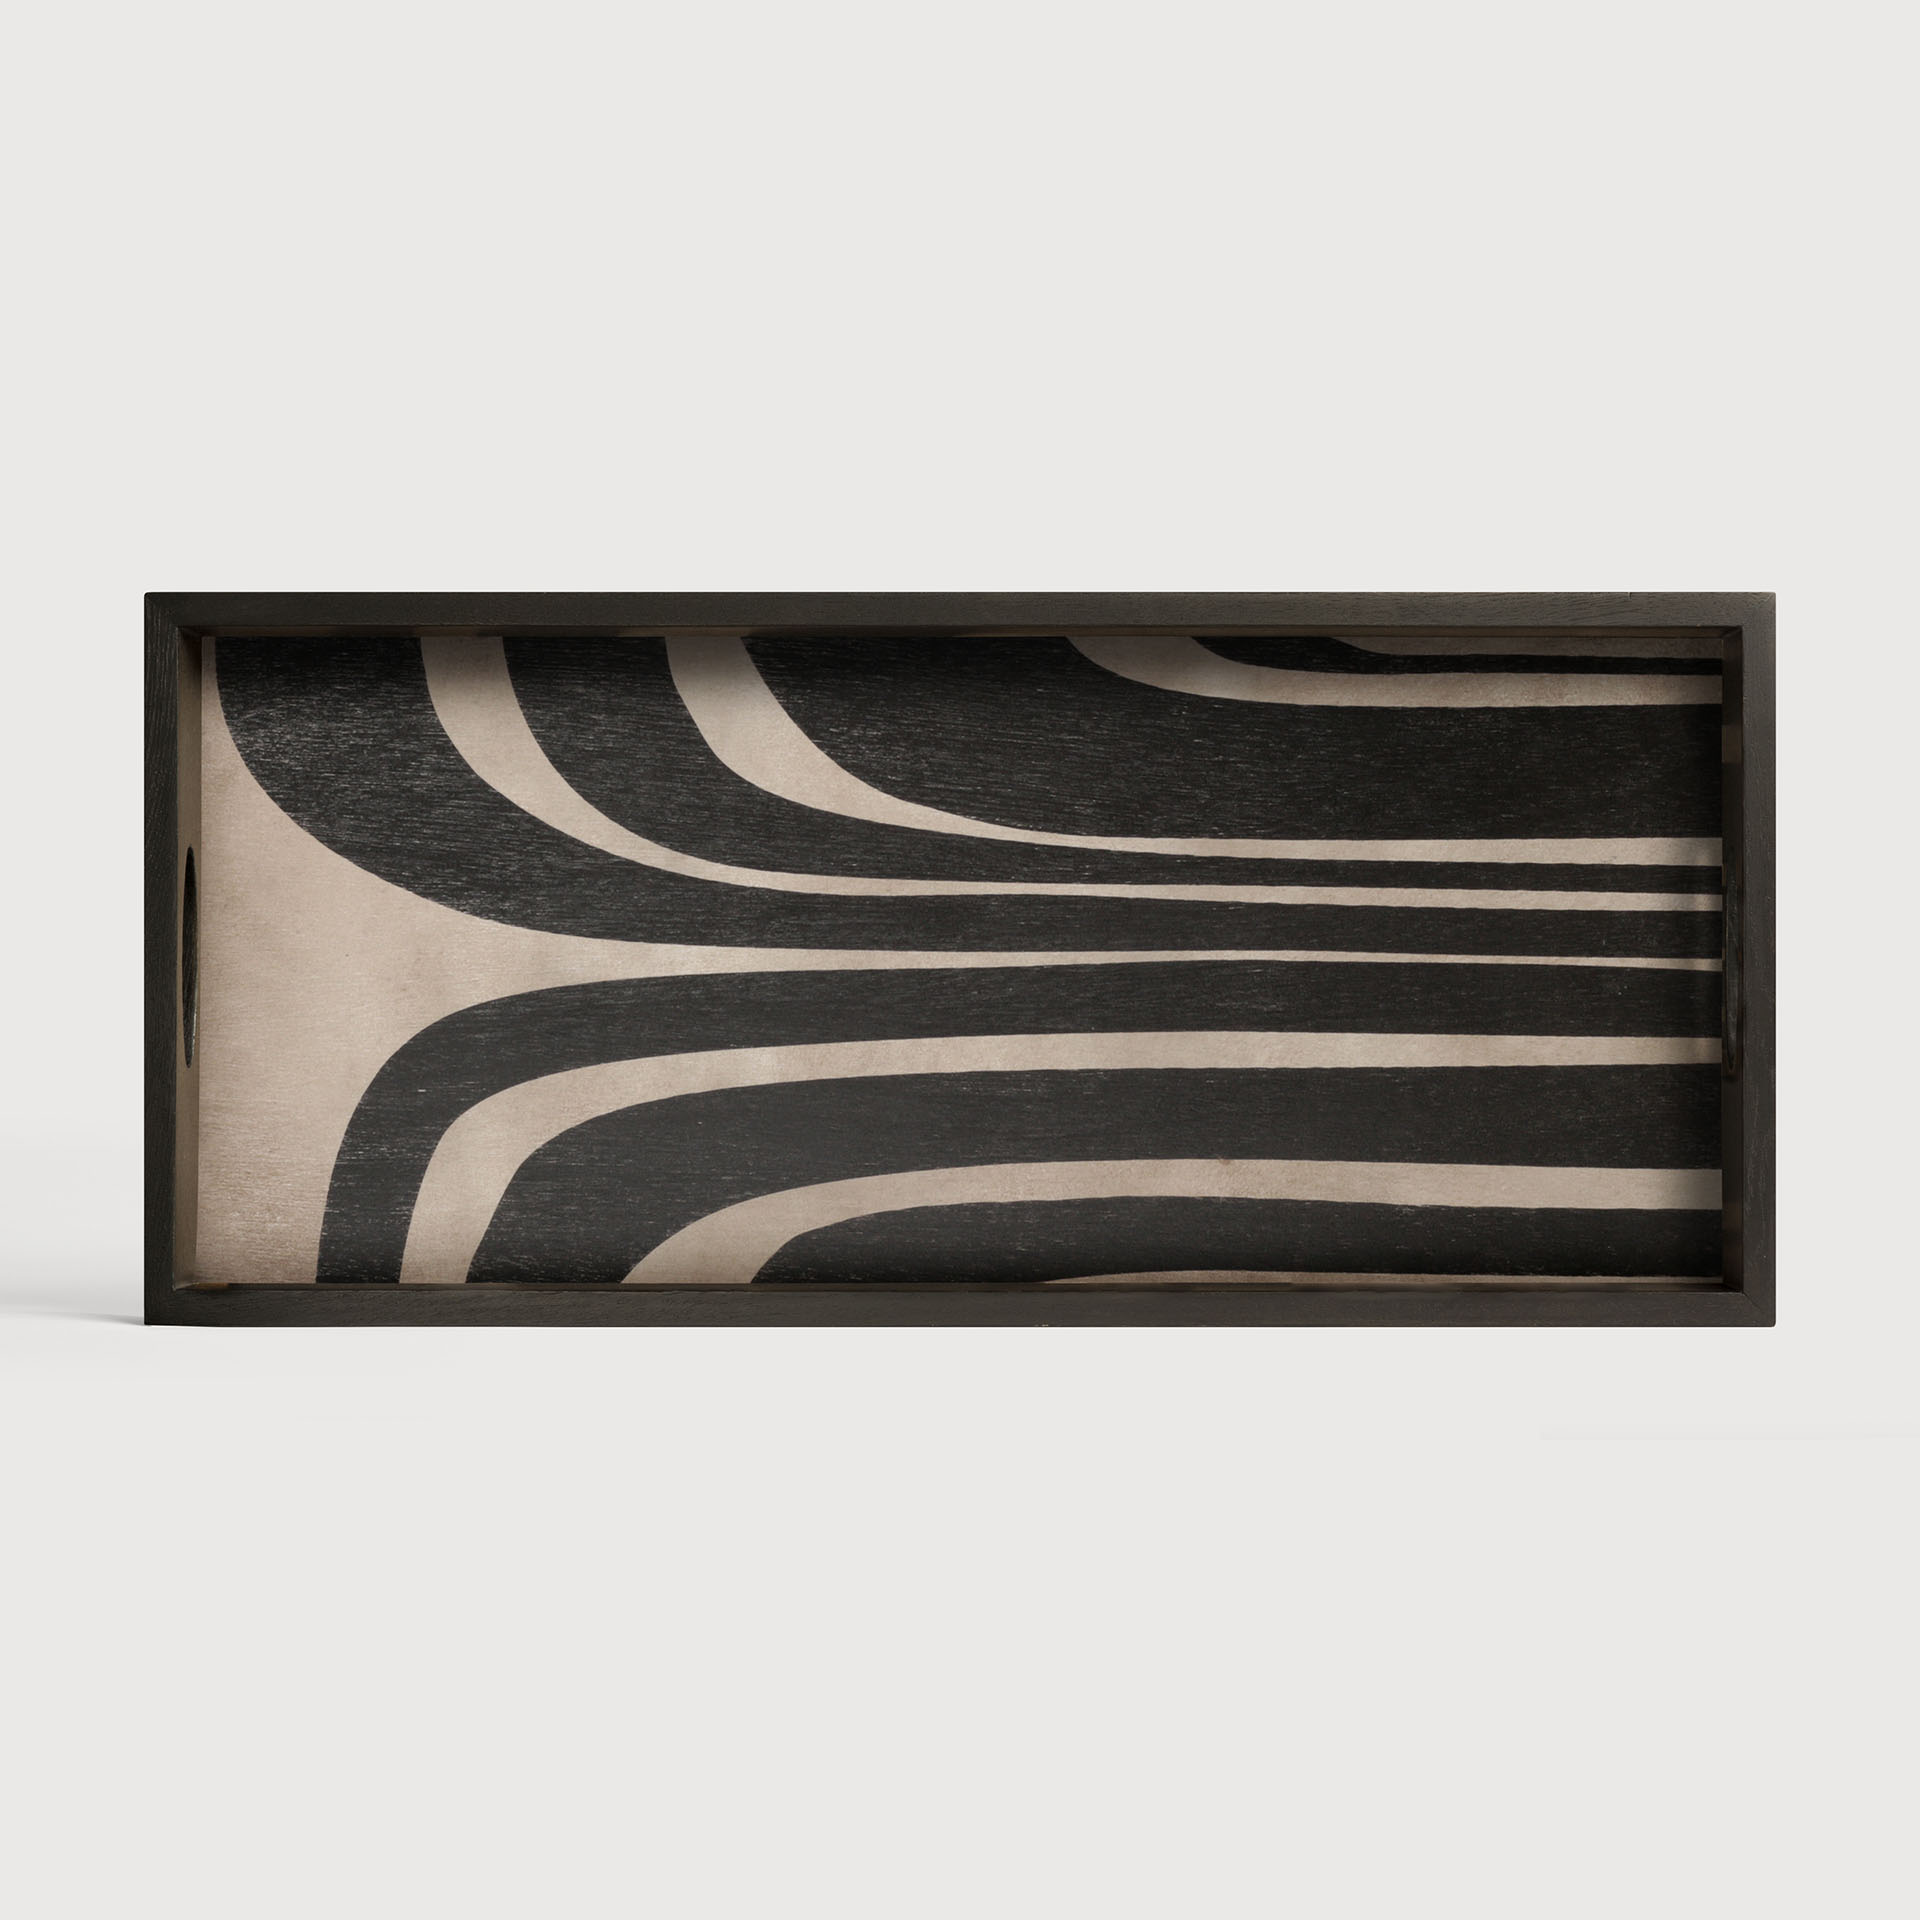 [20939*] Graphite Curves wooden tray 